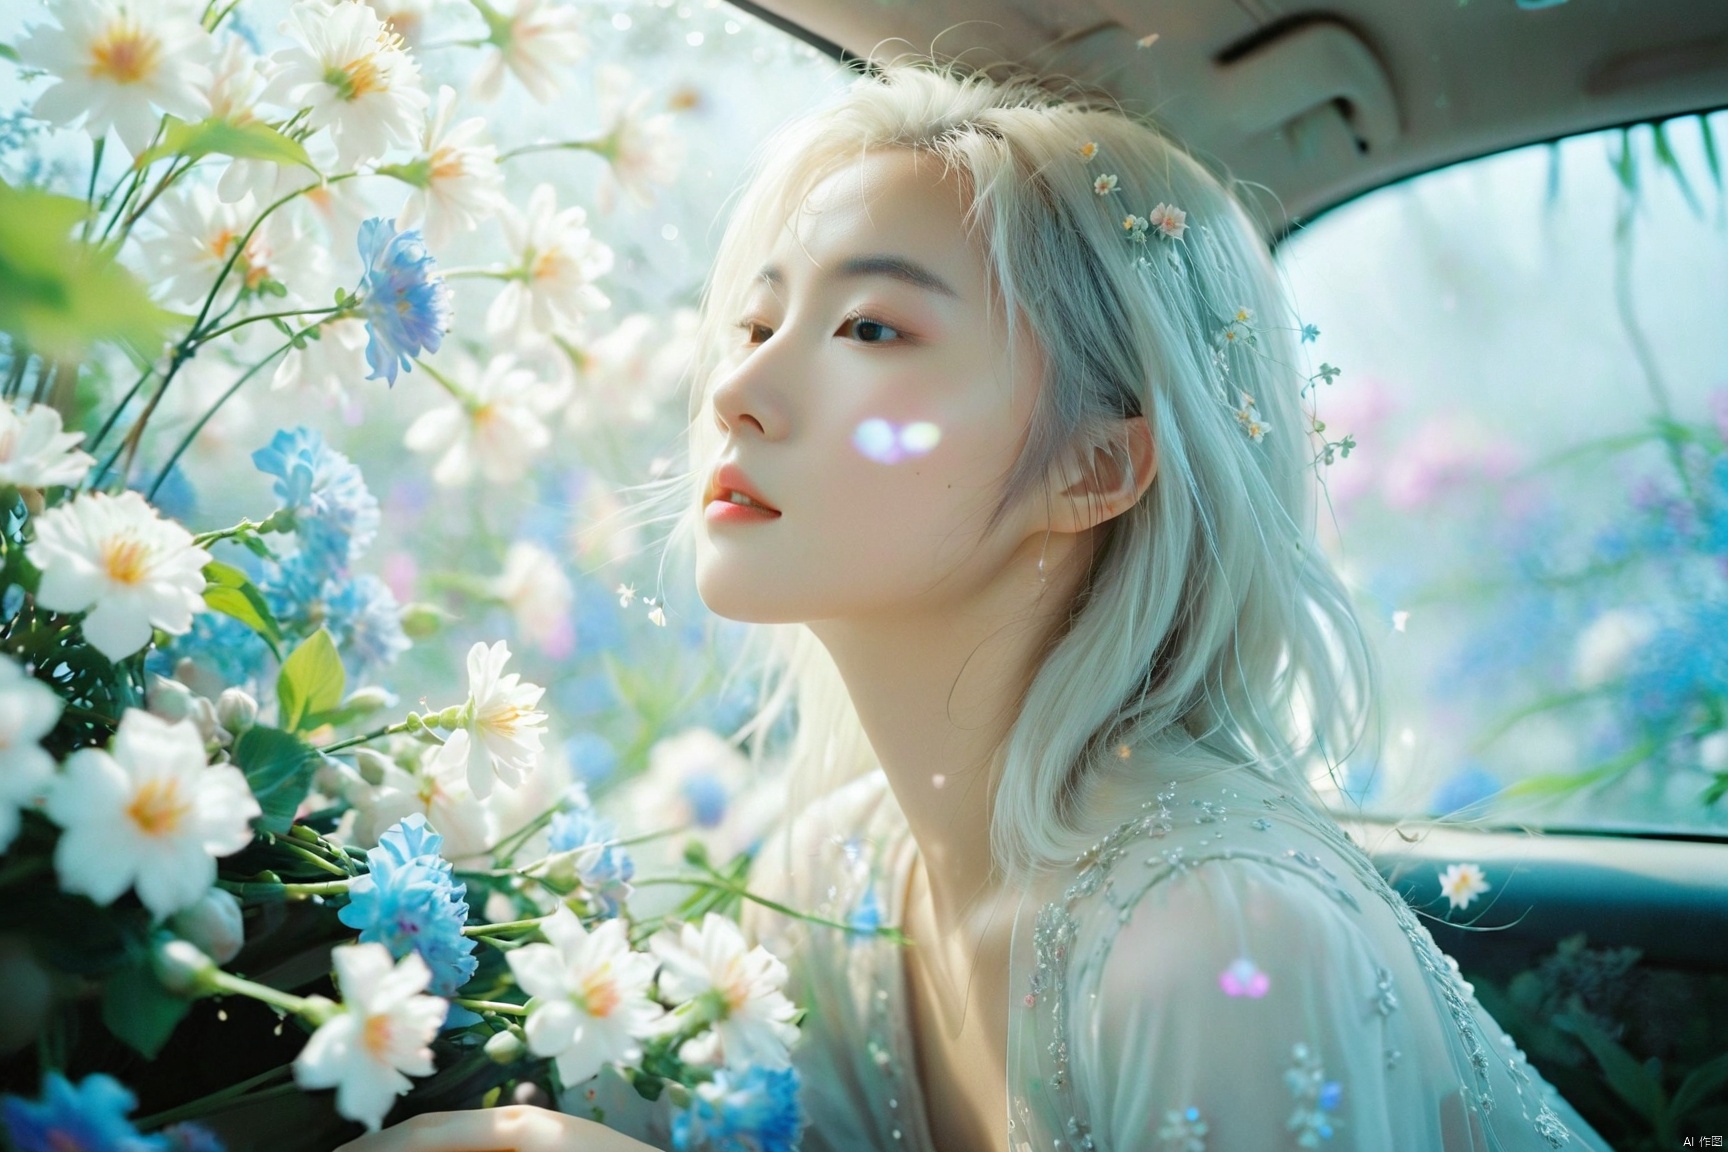  breathtaking ethereal fantasy concept art of cinematic film still,chinese girl,a girl with white hair sitting in car filled with flowers,art by Rinko Kawauchi,in the style of naturalistic poses,vacation dadcore,youth fulenergy,a cool expression,body extensions,flowersin the sky,****og film,super detail,dreamy lofi photography,colourful,covered in flowers andvines,Inside view,shot on fujifilm XT4 . shallow depth of field,vignette,highly detailed,high budget,bokeh,cinemascope,moody,epic,gorgeous,film grain,grainy . magnificent,celestial,ethereal,painterly,epic,majestic,magical,fantasy art,cover art,dreamy,monkren, . award-winning, professional, highly detailed, light master, monkren, sunlight, liu yifei